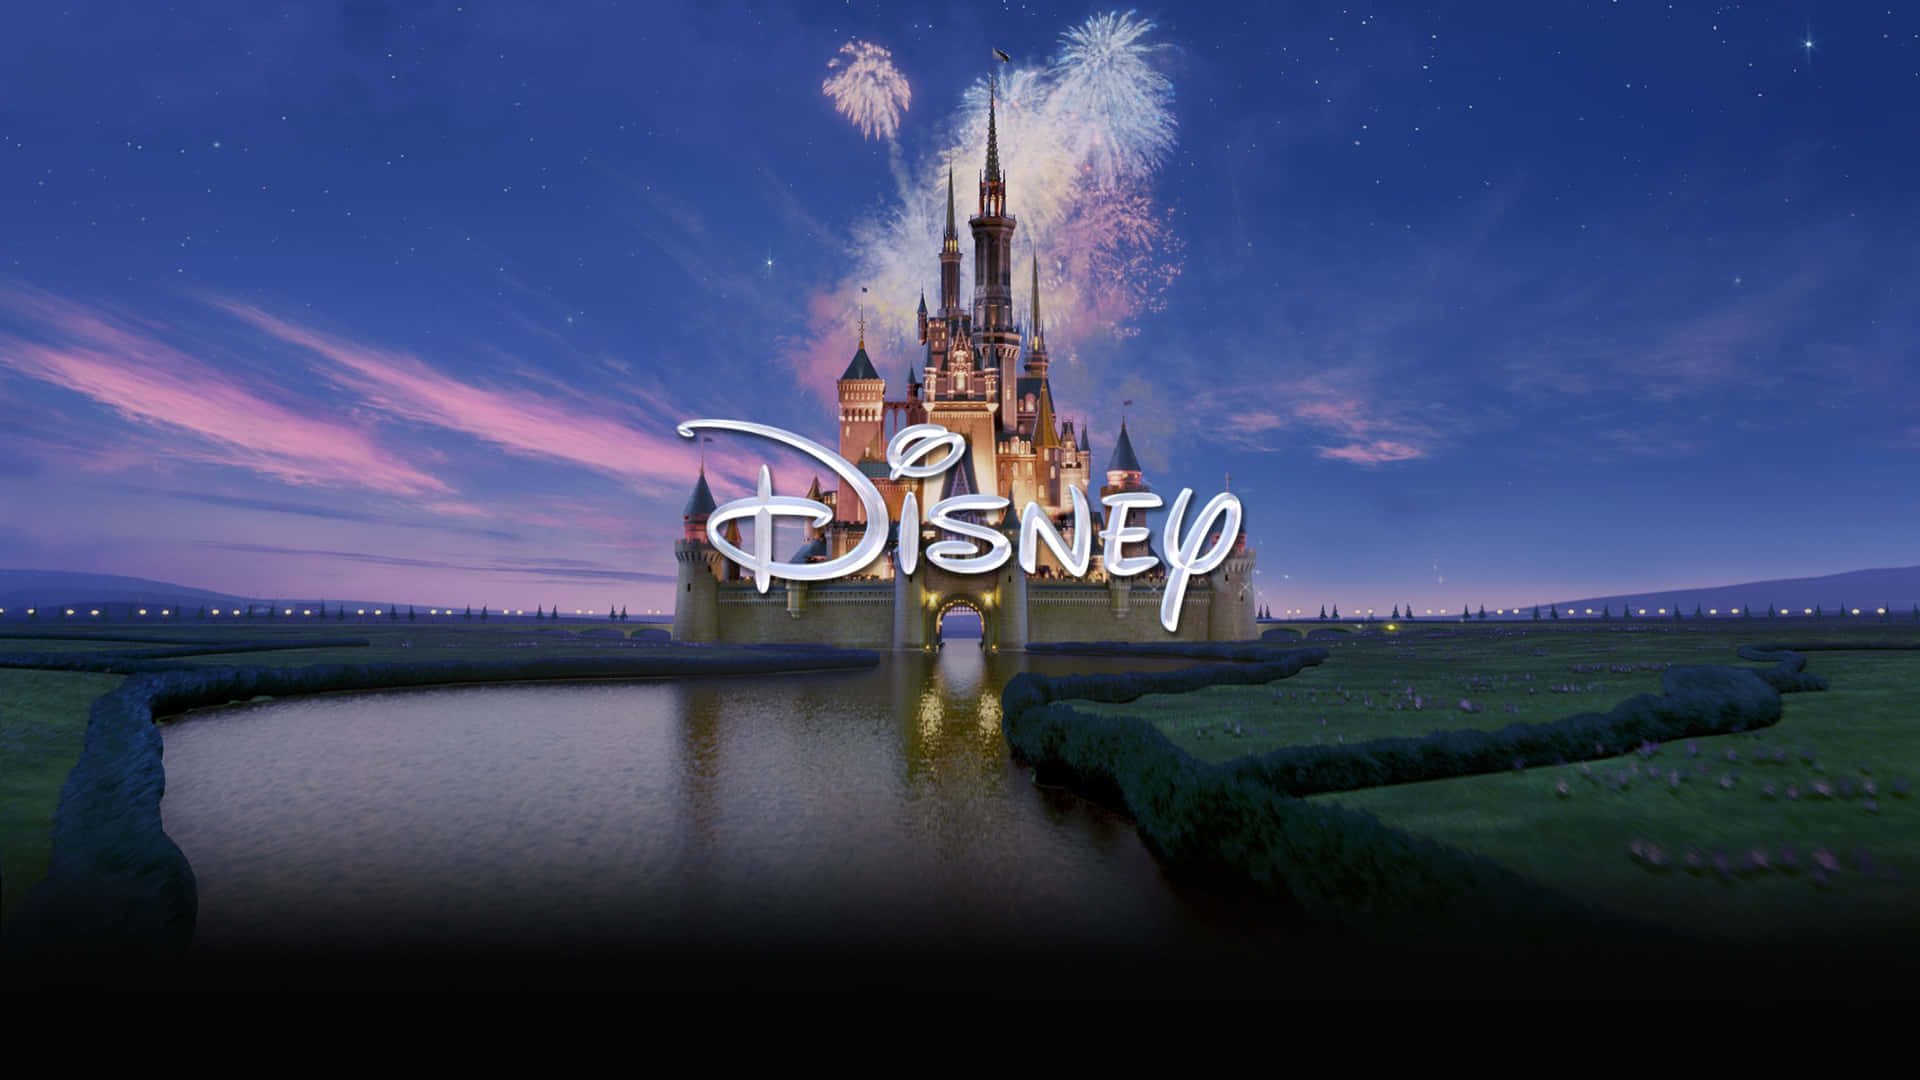 Take an adventure and explore the world of Disney!